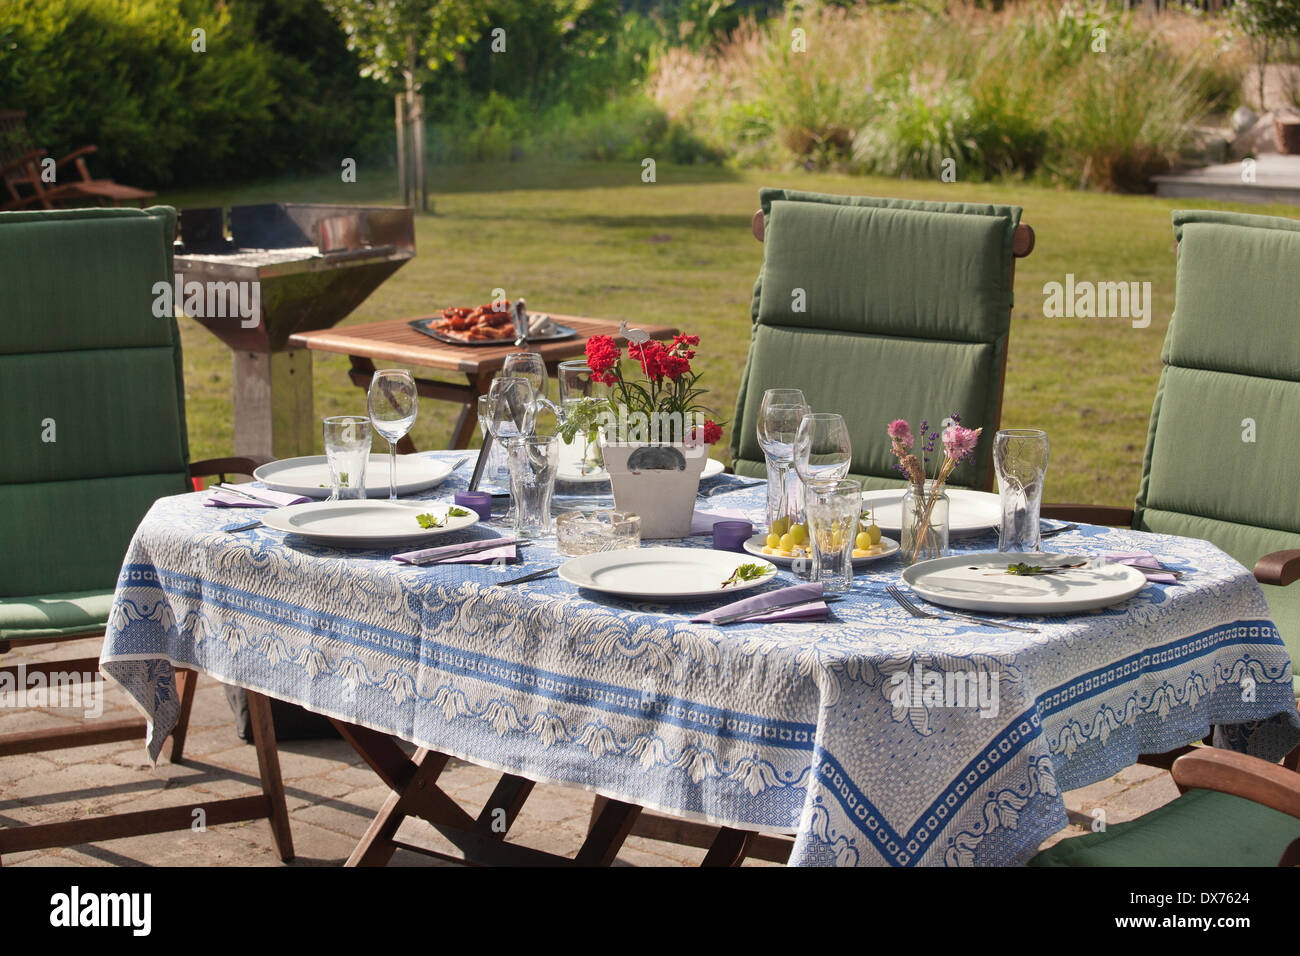 a laid table in the garden, in the background a barbecue with fresh meat Stock Photo